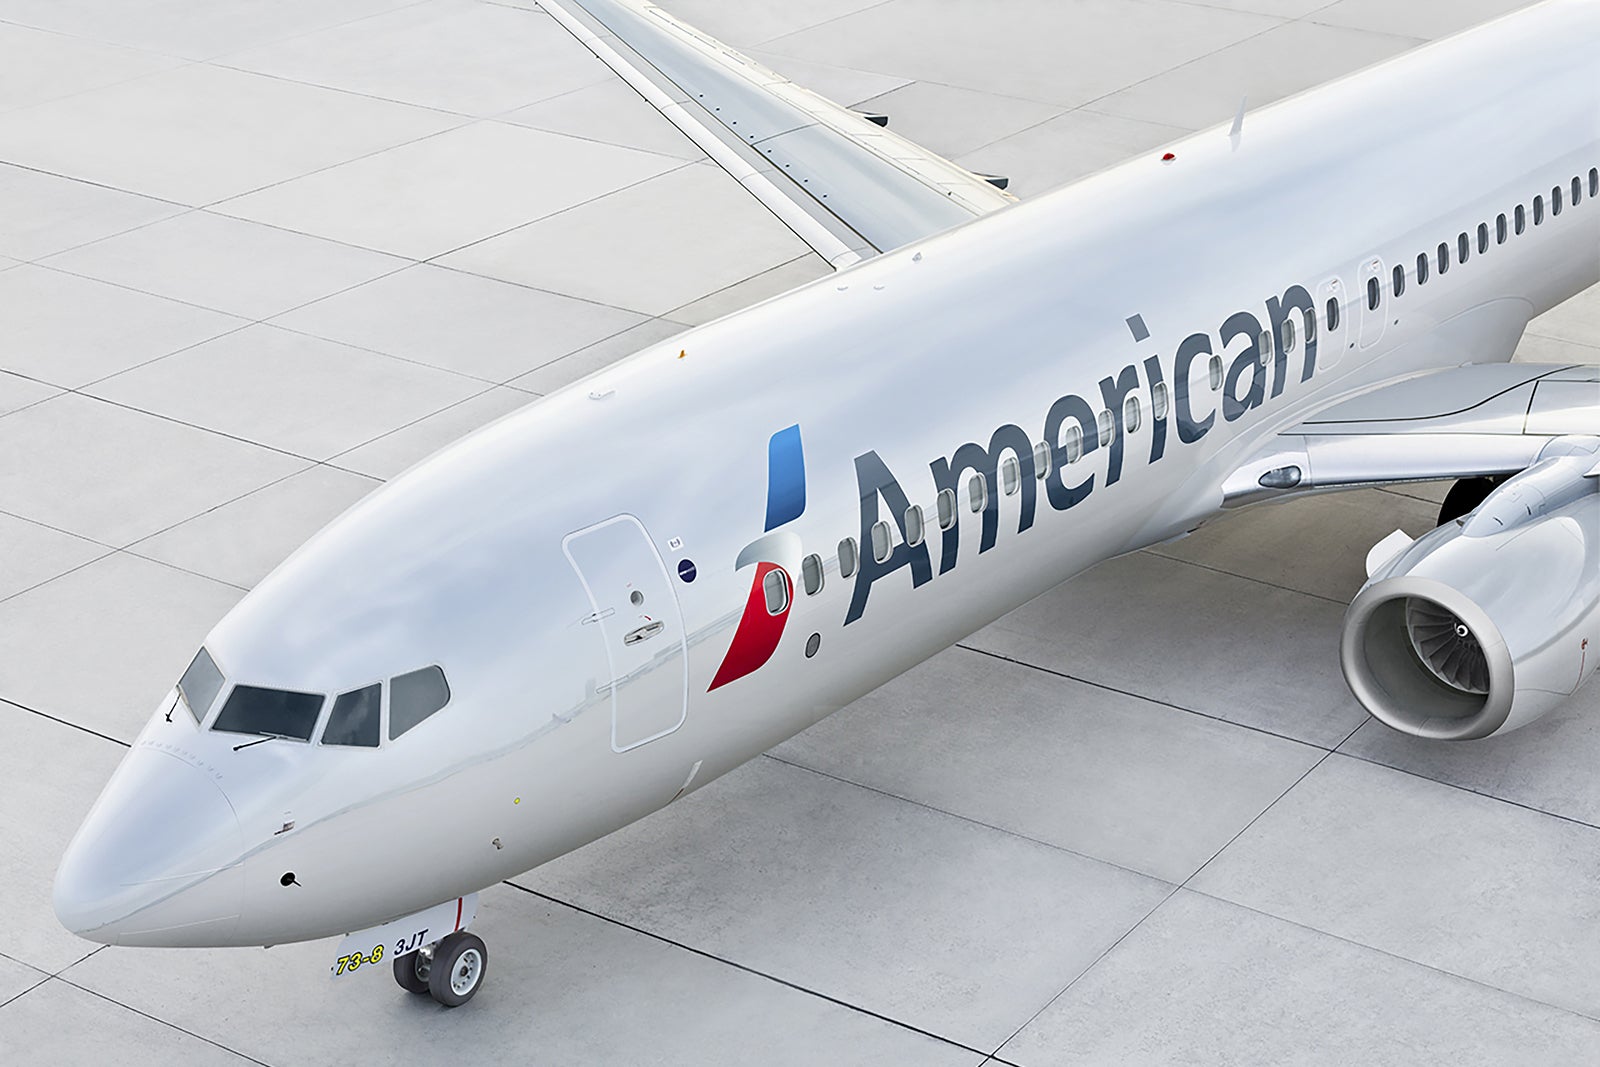 American Airlines jet